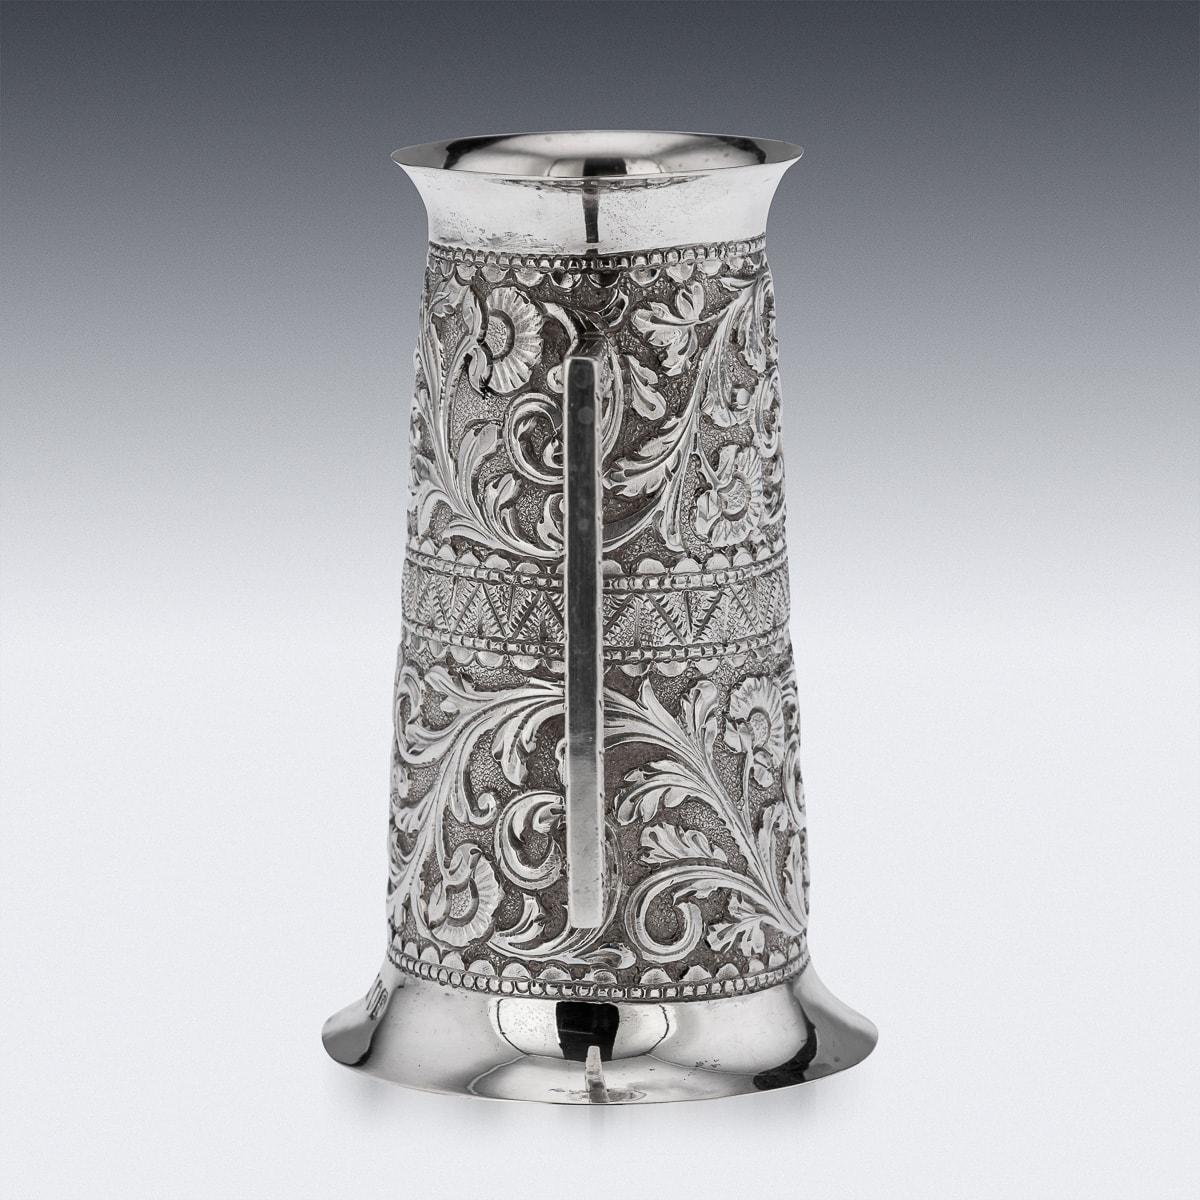 British 20th Century Edwardian Solid Silver Spirit Measure Cup, London, c.1901 For Sale